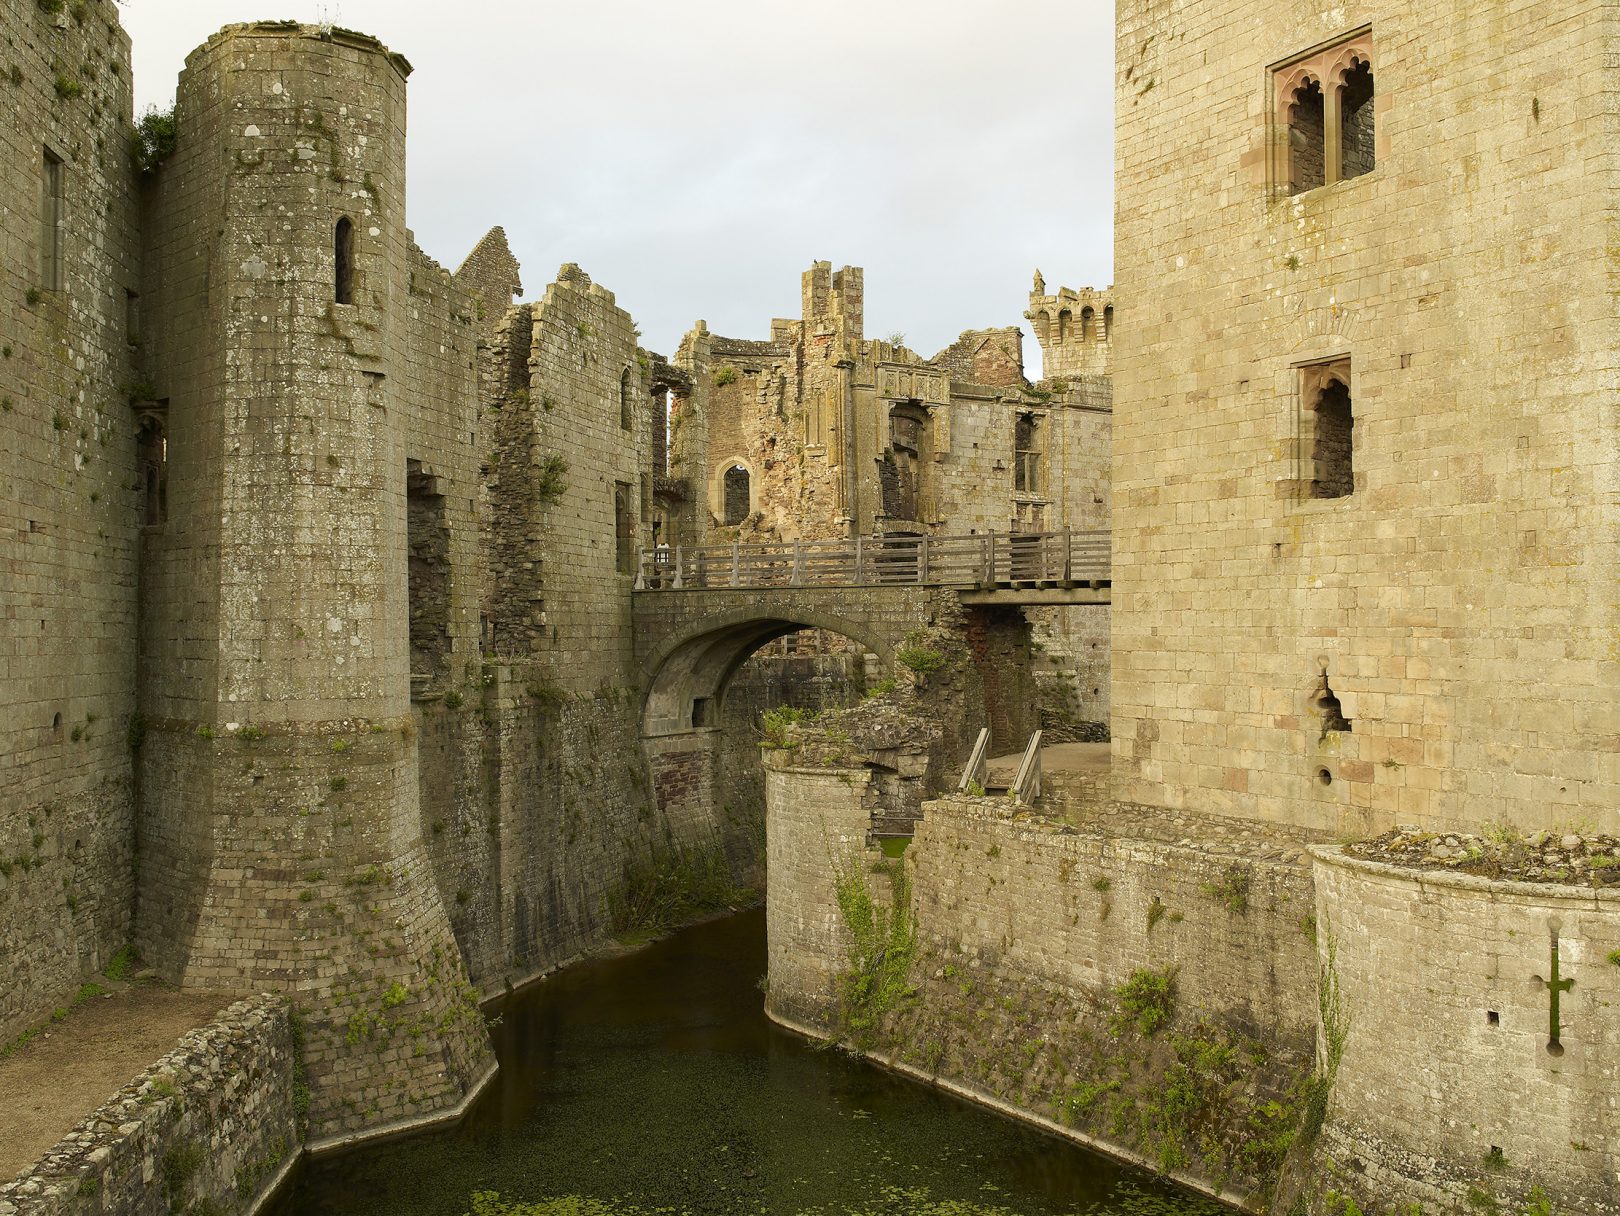 Raglan Castle: How the last great medieval castle in Britain became a